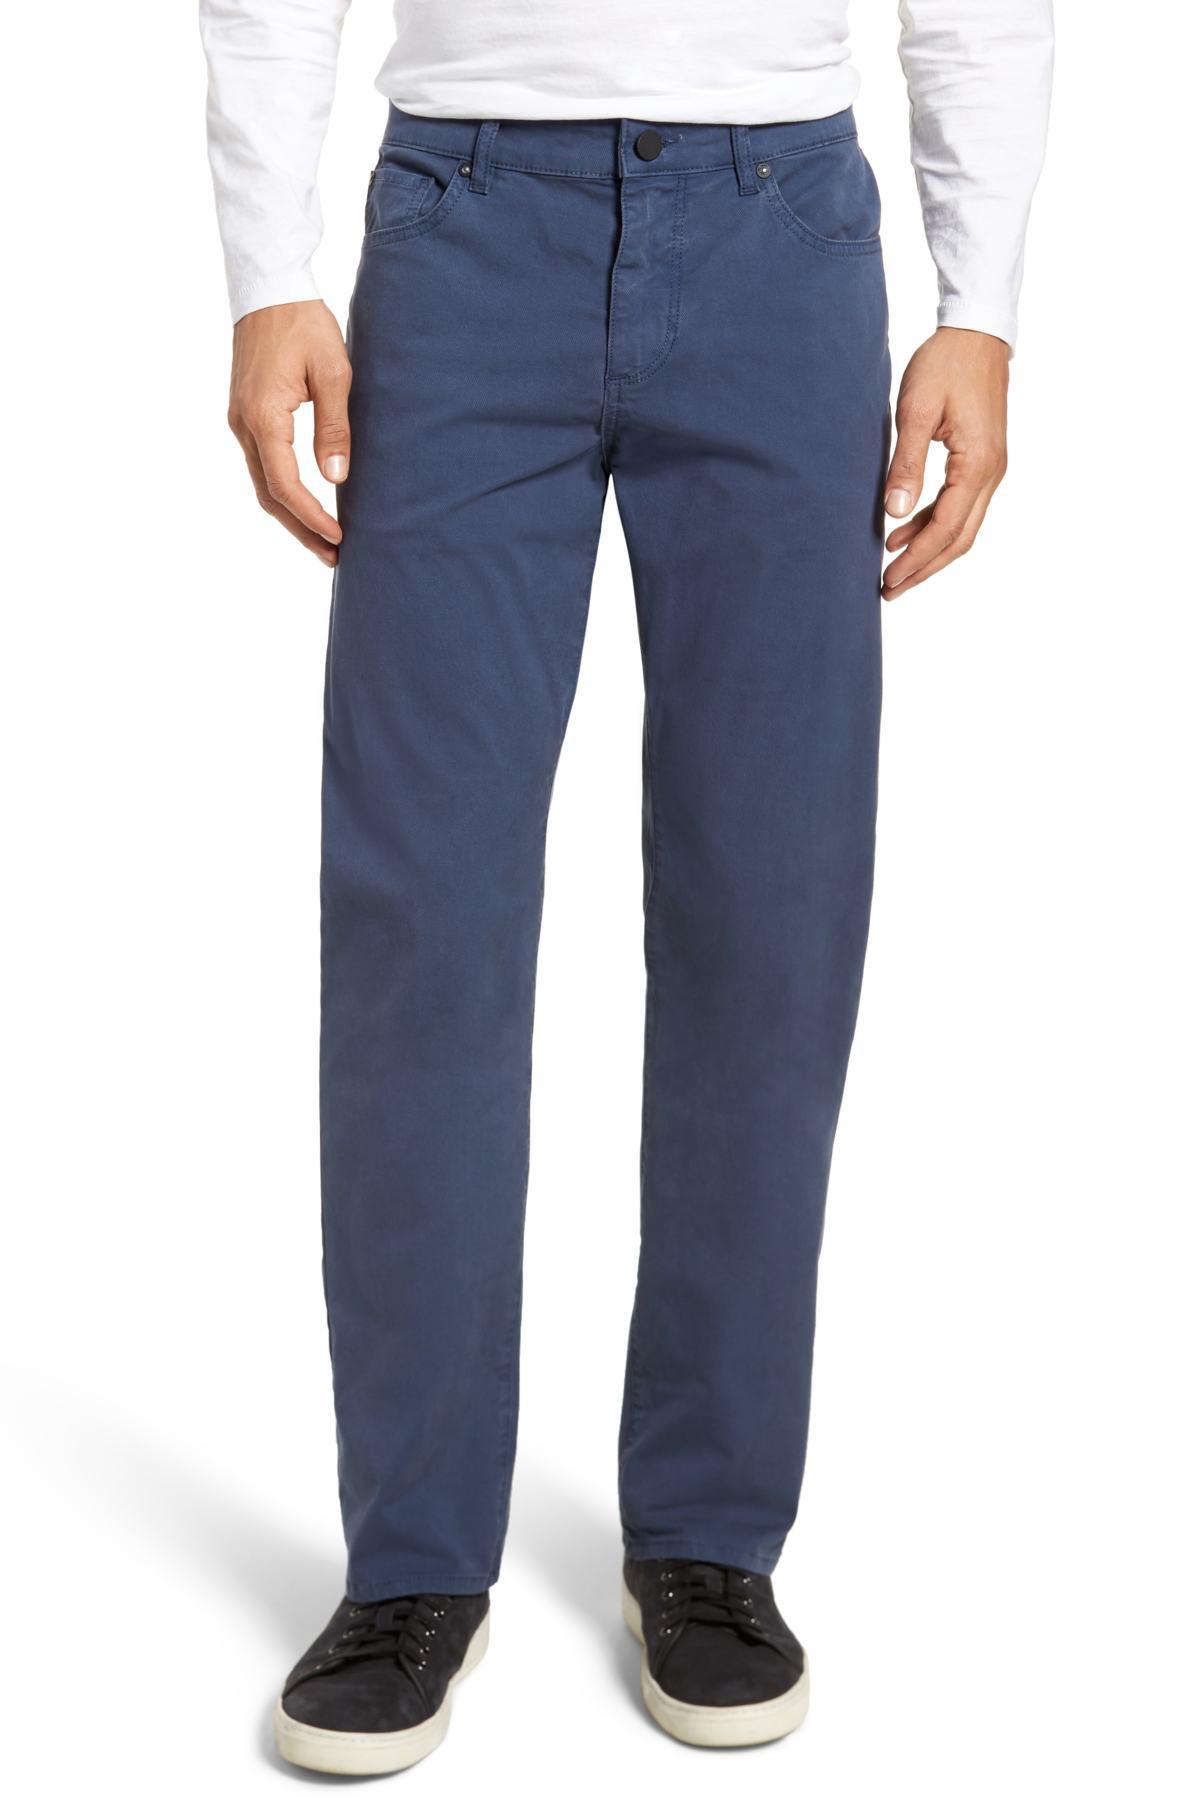 Lyst - DL1961 Avery Slim Straight Chino Pants in Blue for Men